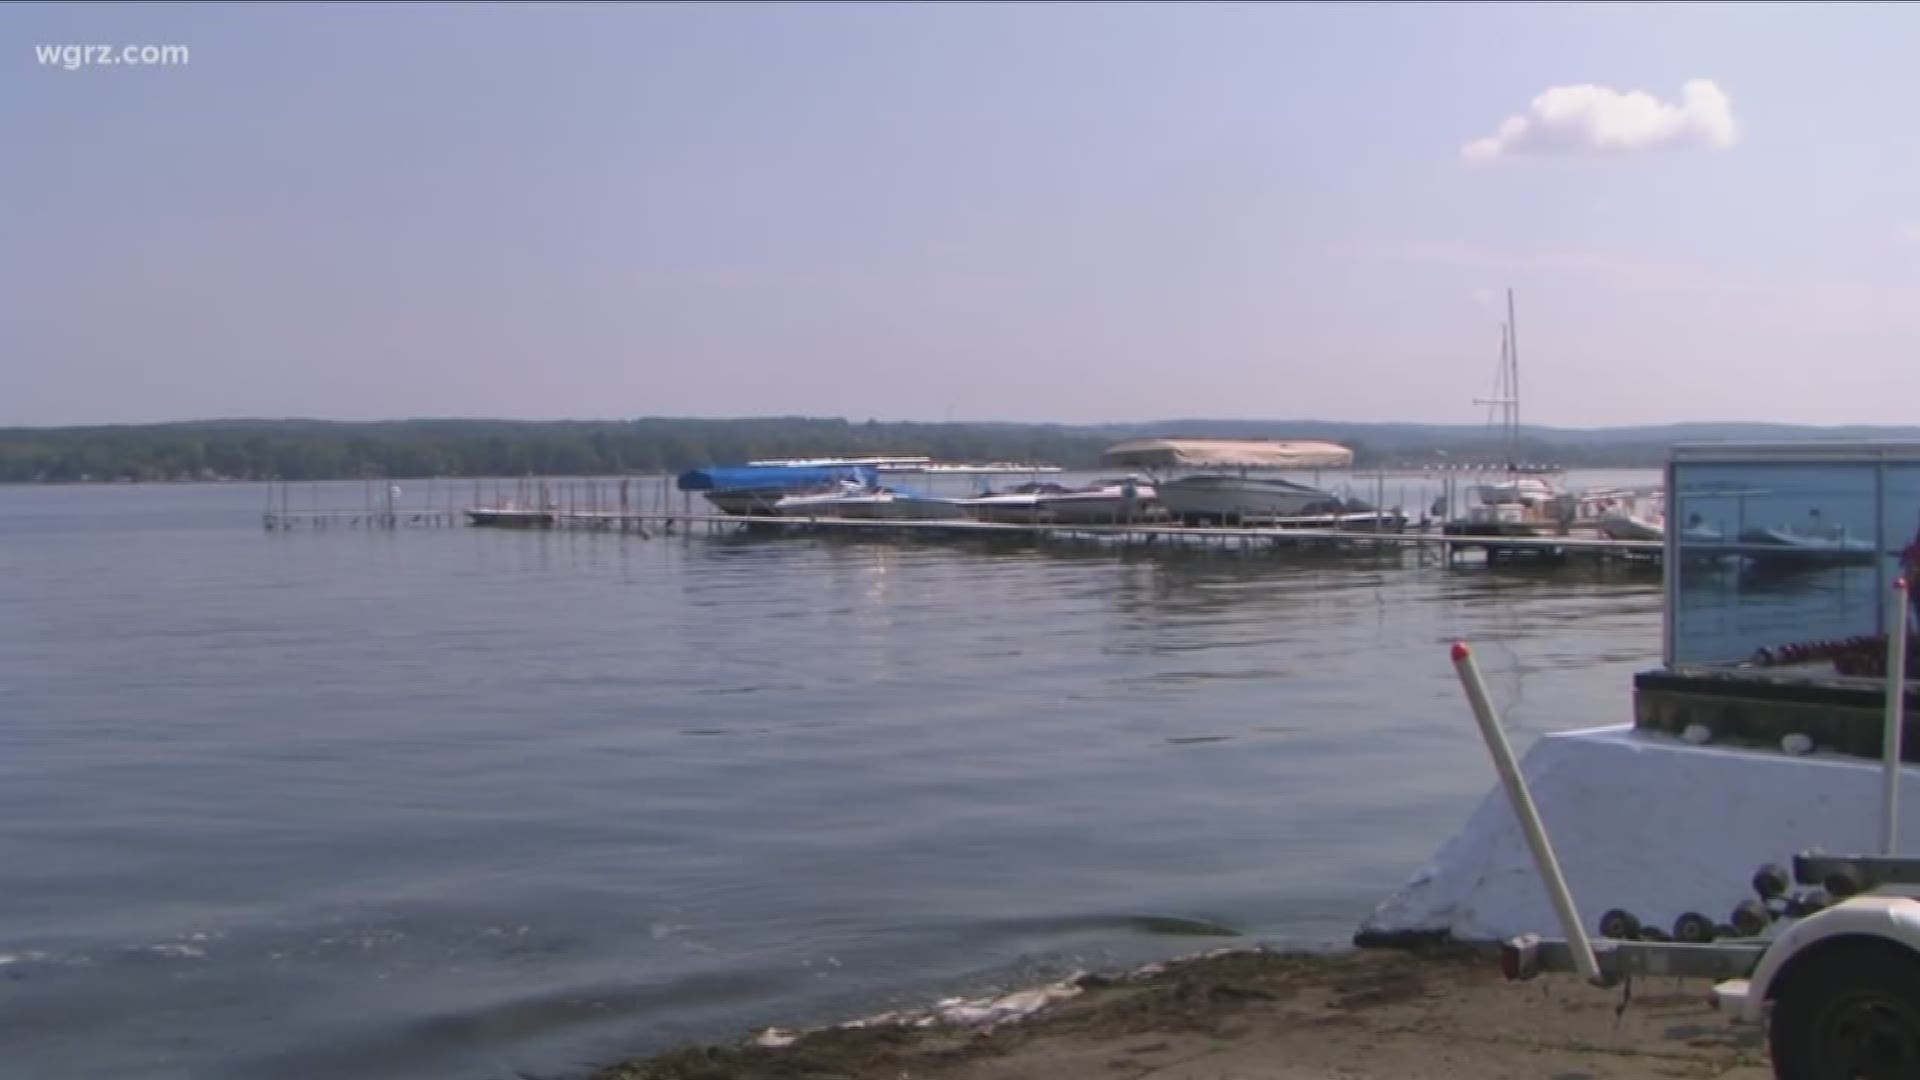 Search For Missing Boater Found On Chautauqua Lake